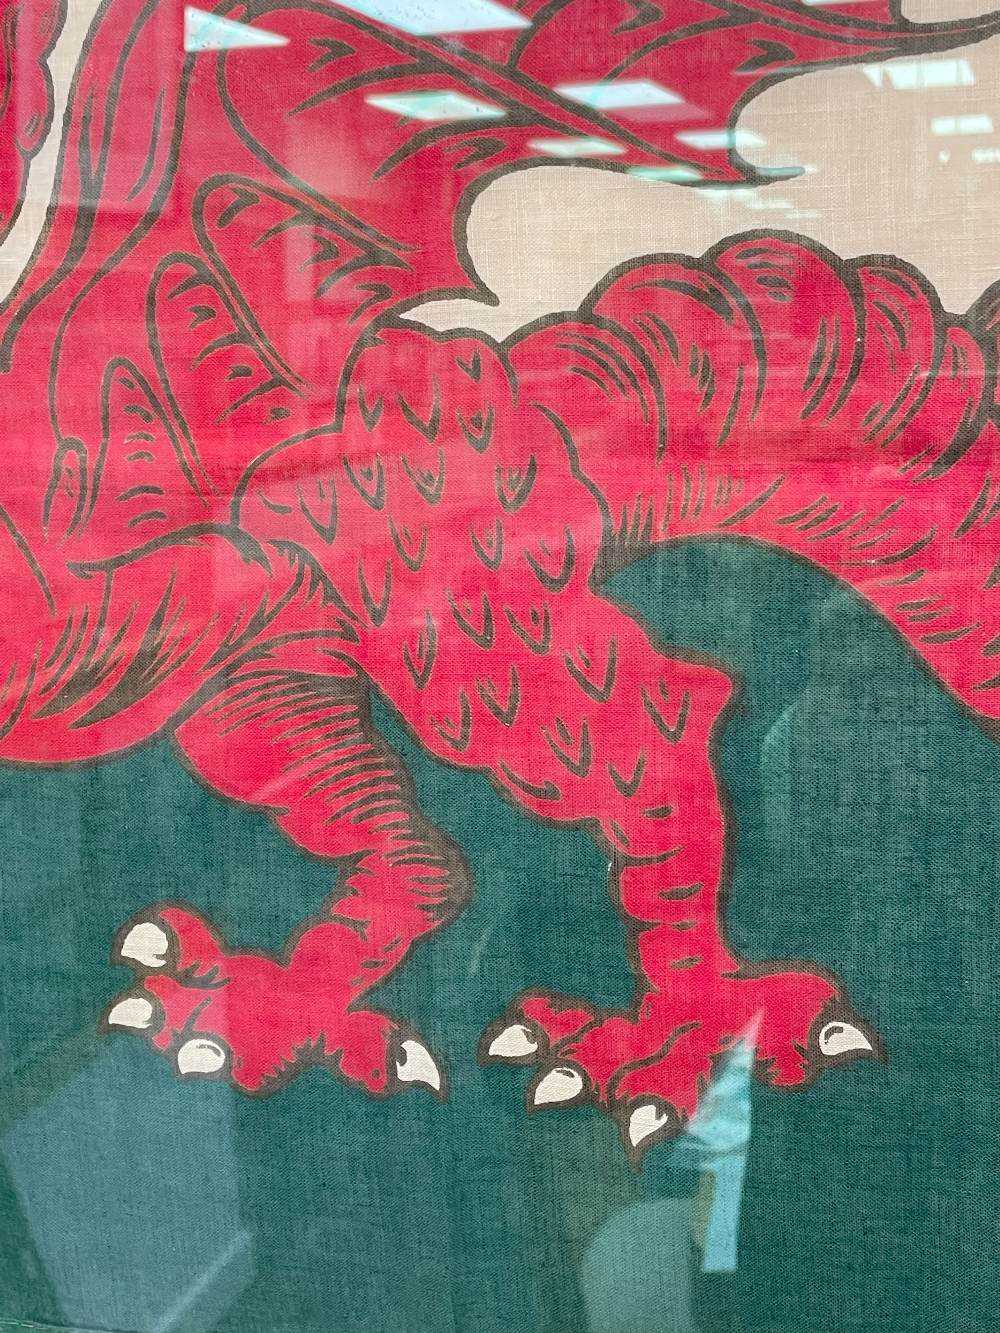 EARLY 20TH CENTURY WELSH FLAG (Y DDRAIG GOCH) with stitched edging and printed British made, 43 x - Image 15 of 21